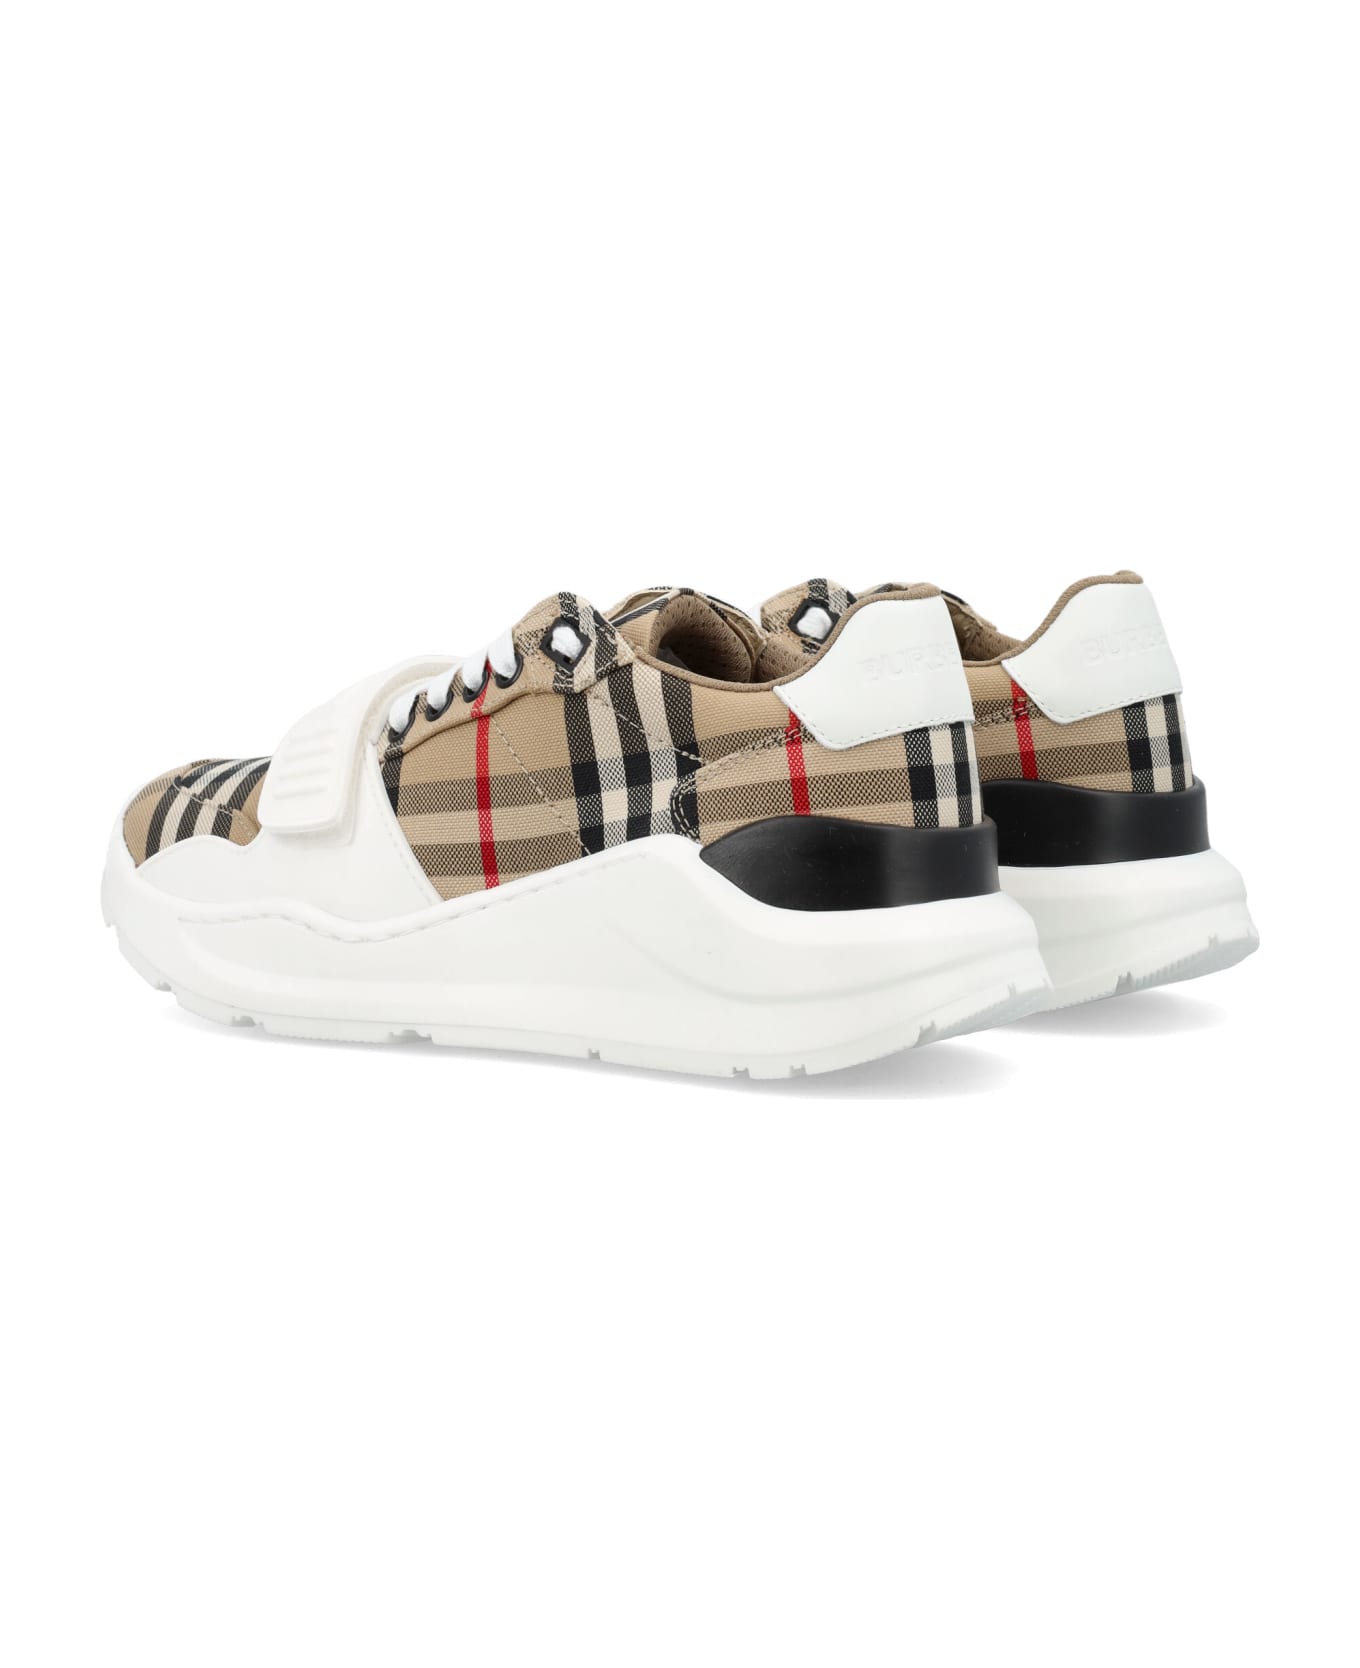 Burberry London Check Woman's Sneakers - ARCHIVE BEIGE IP CHK スニーカー